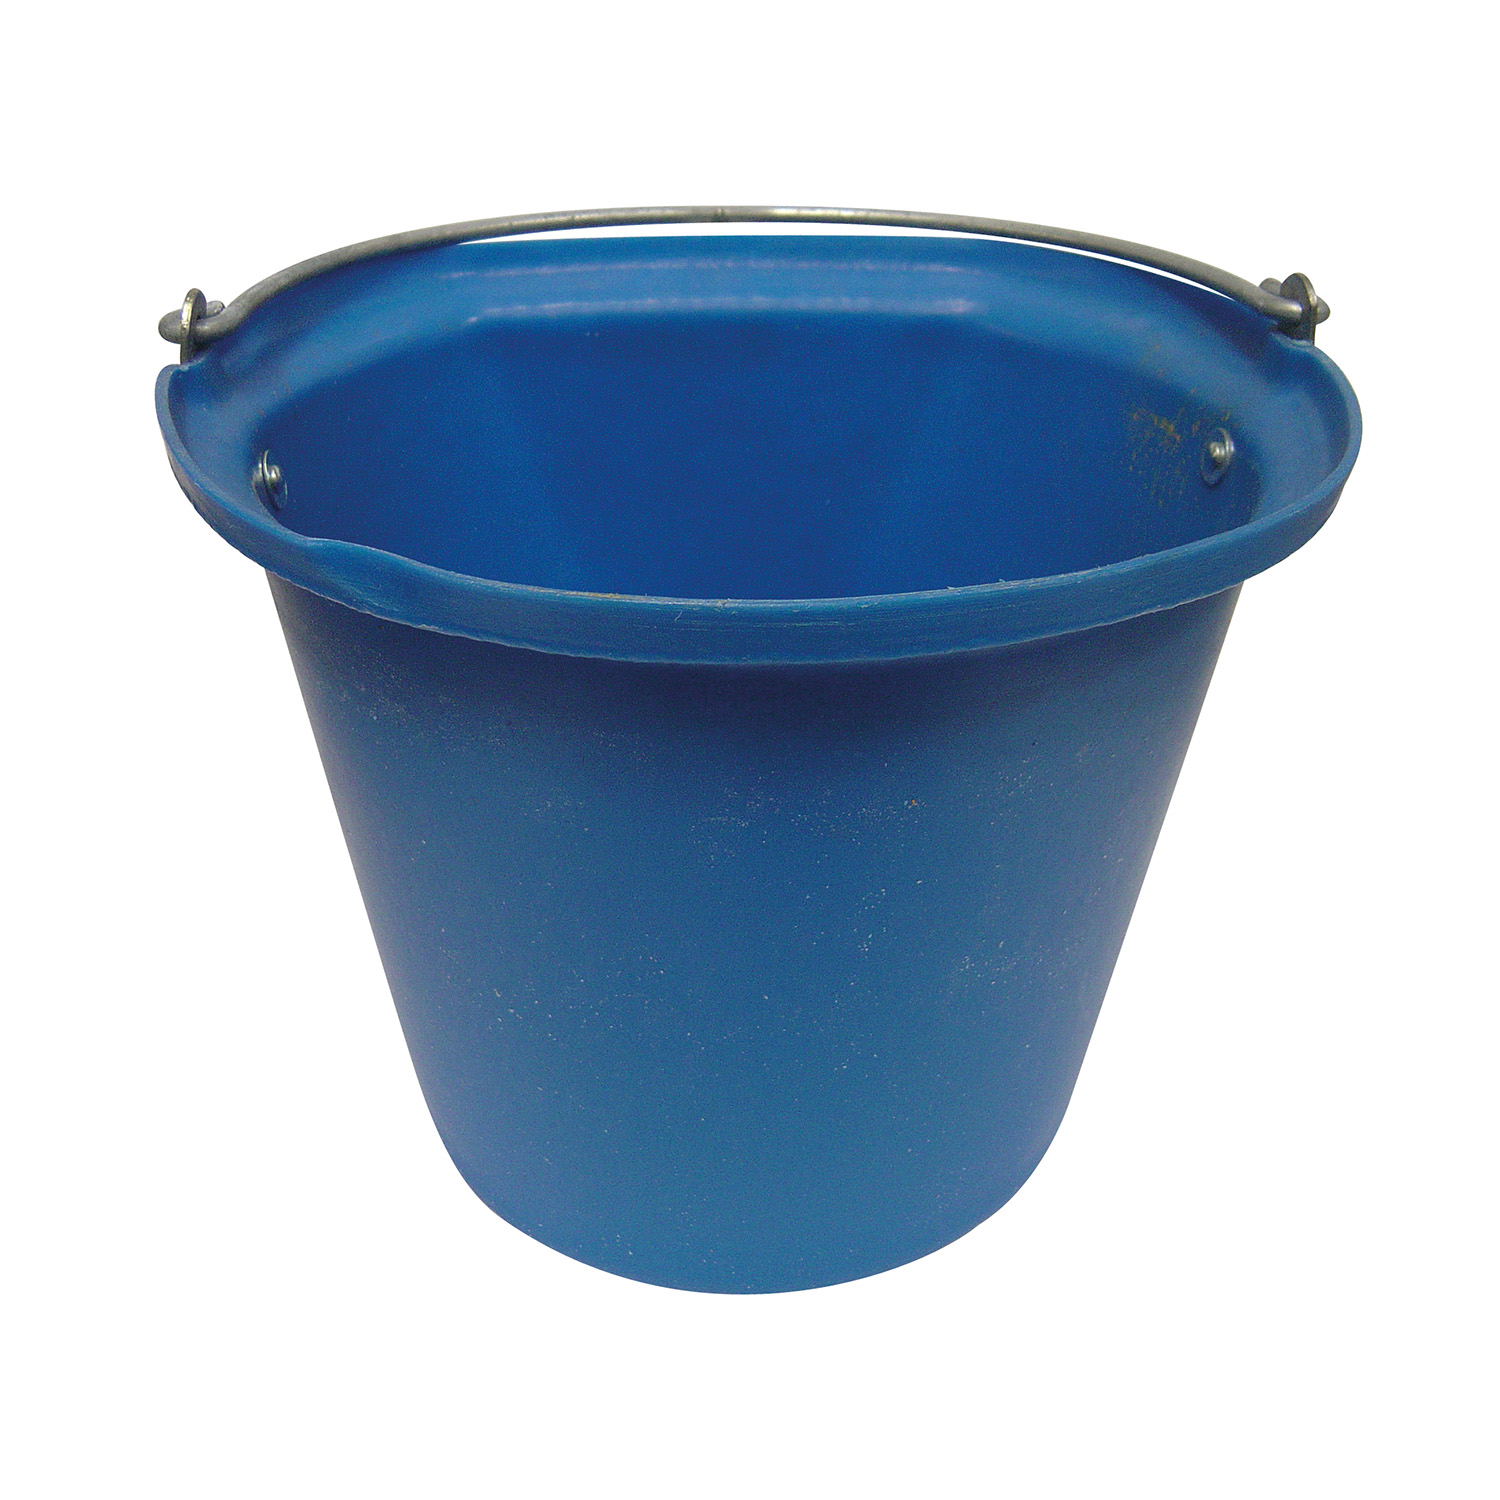 STUBBS HANGING BUCKET FLAT SIDED LARGE 18 LT S85A BLUE 18 LT